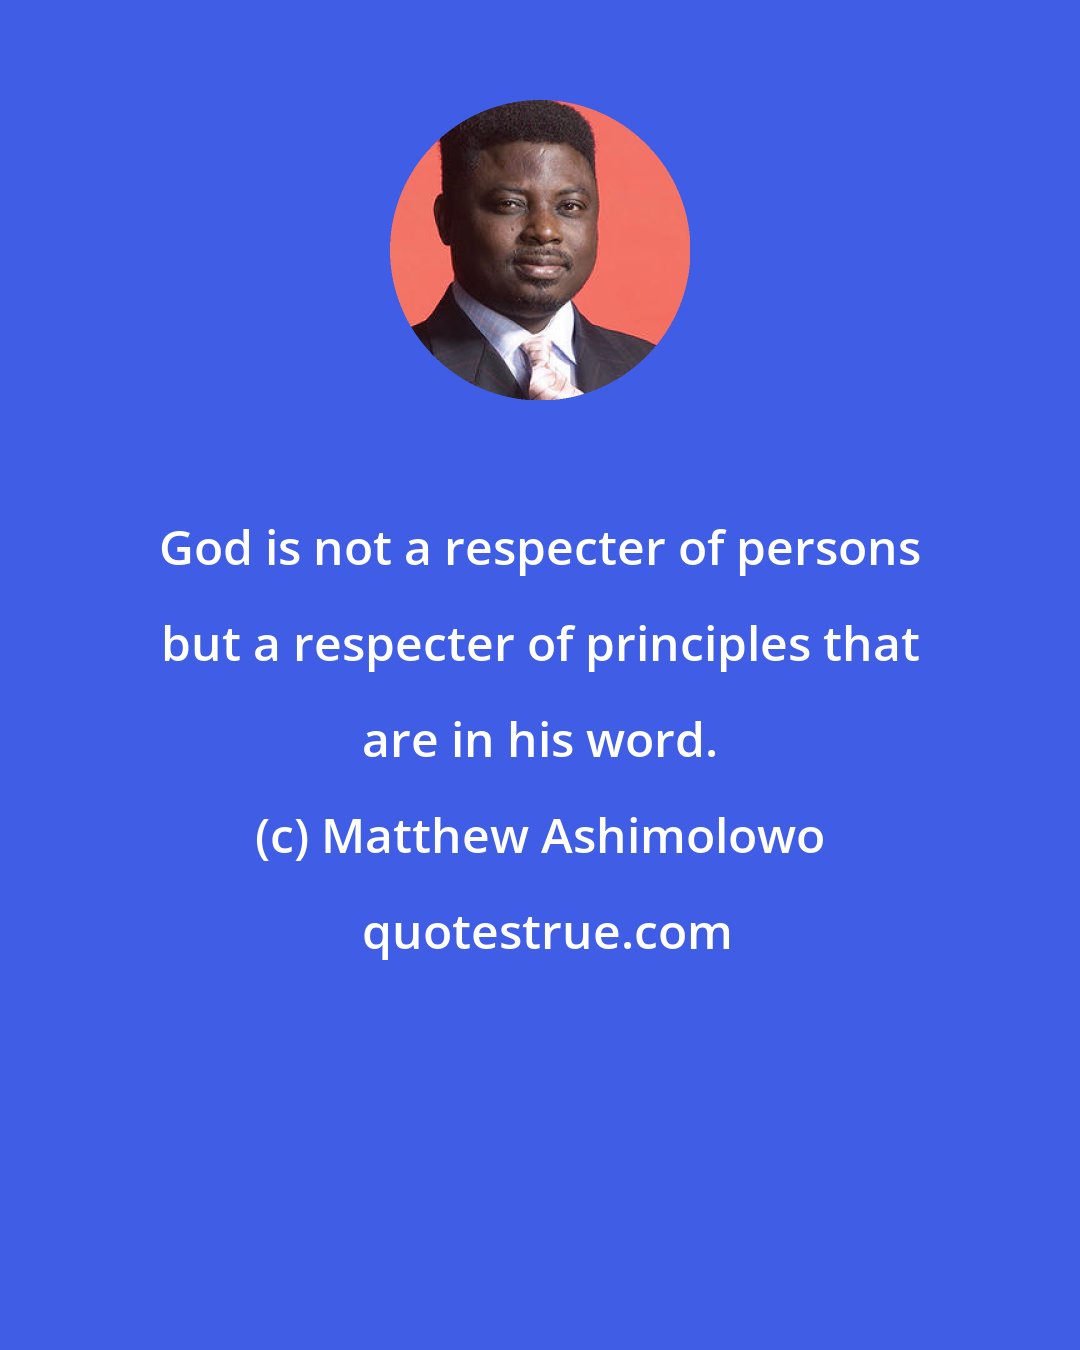 Matthew Ashimolowo: God is not a respecter of persons but a respecter of principles that are in his word.